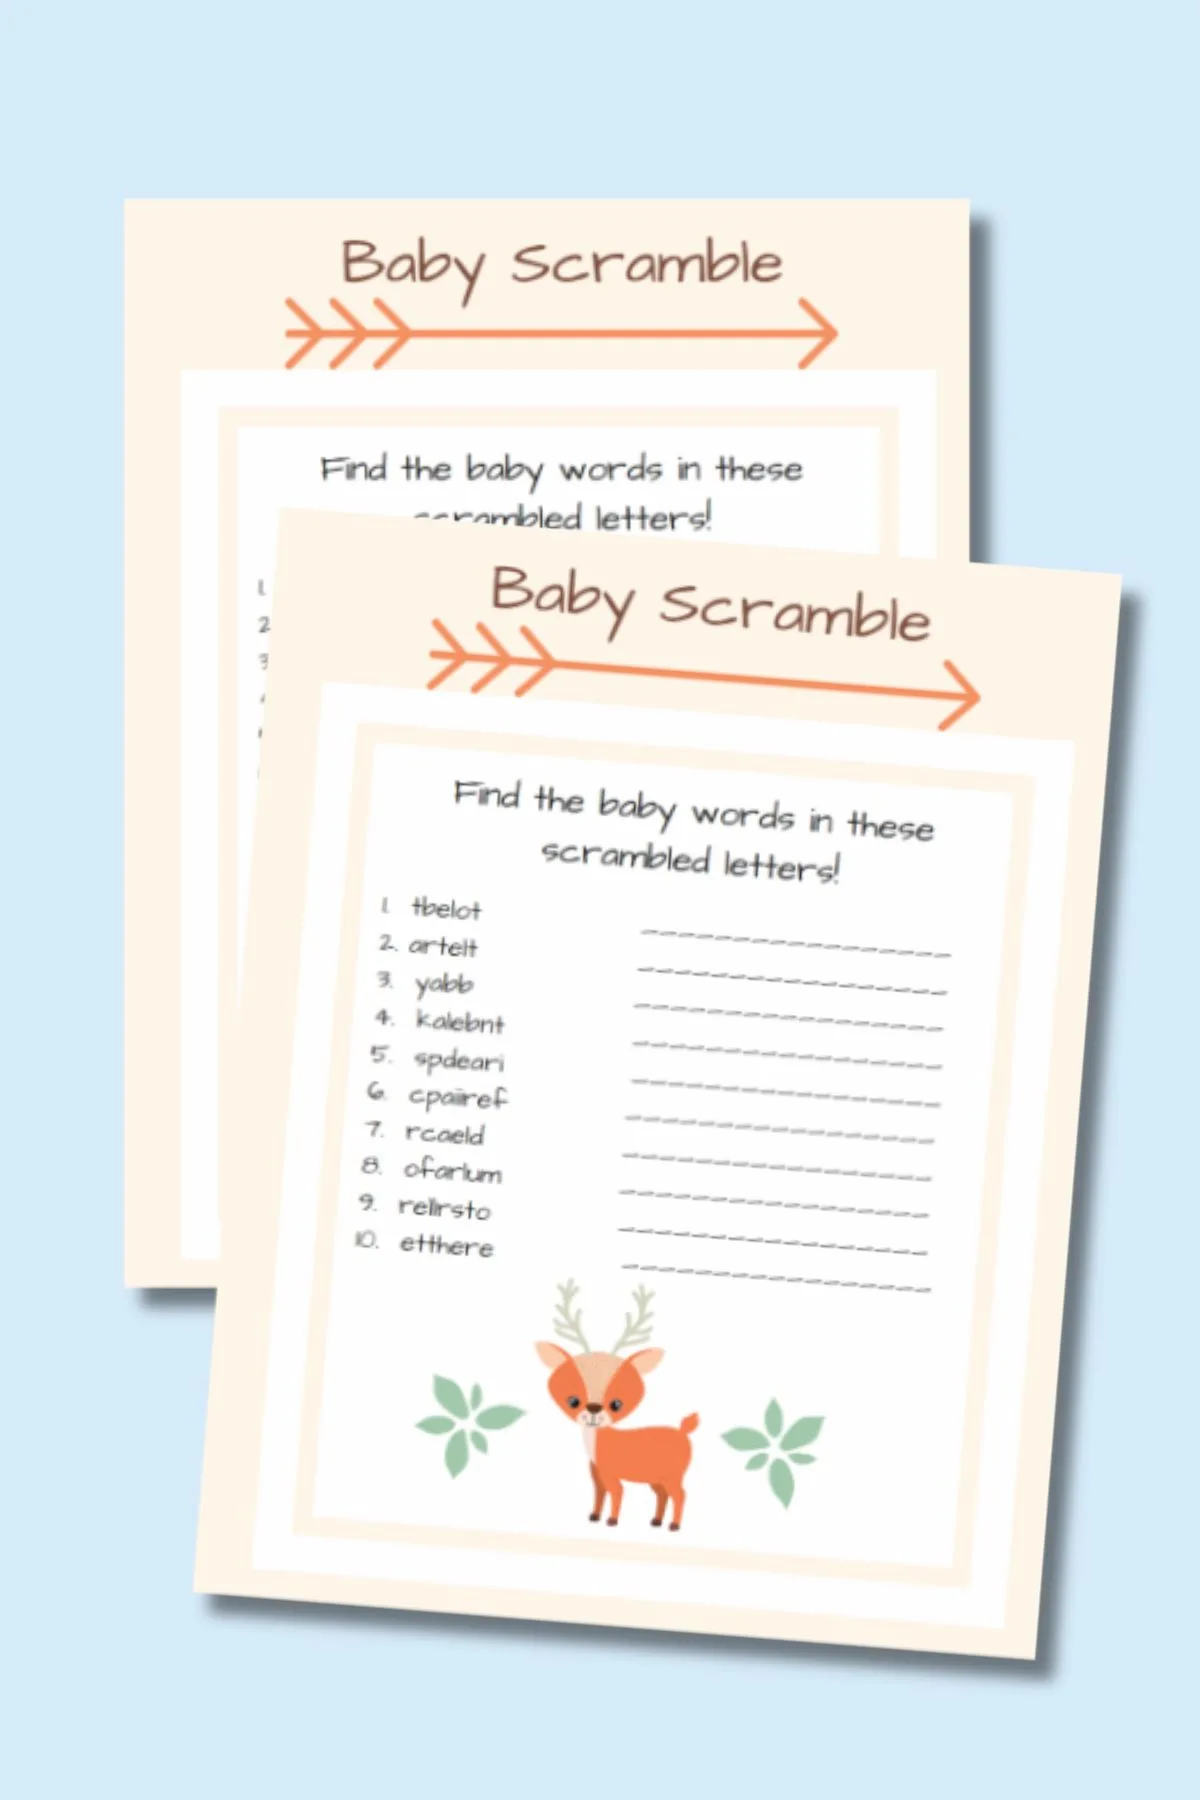 Baby shower word scramble printables on blue background.